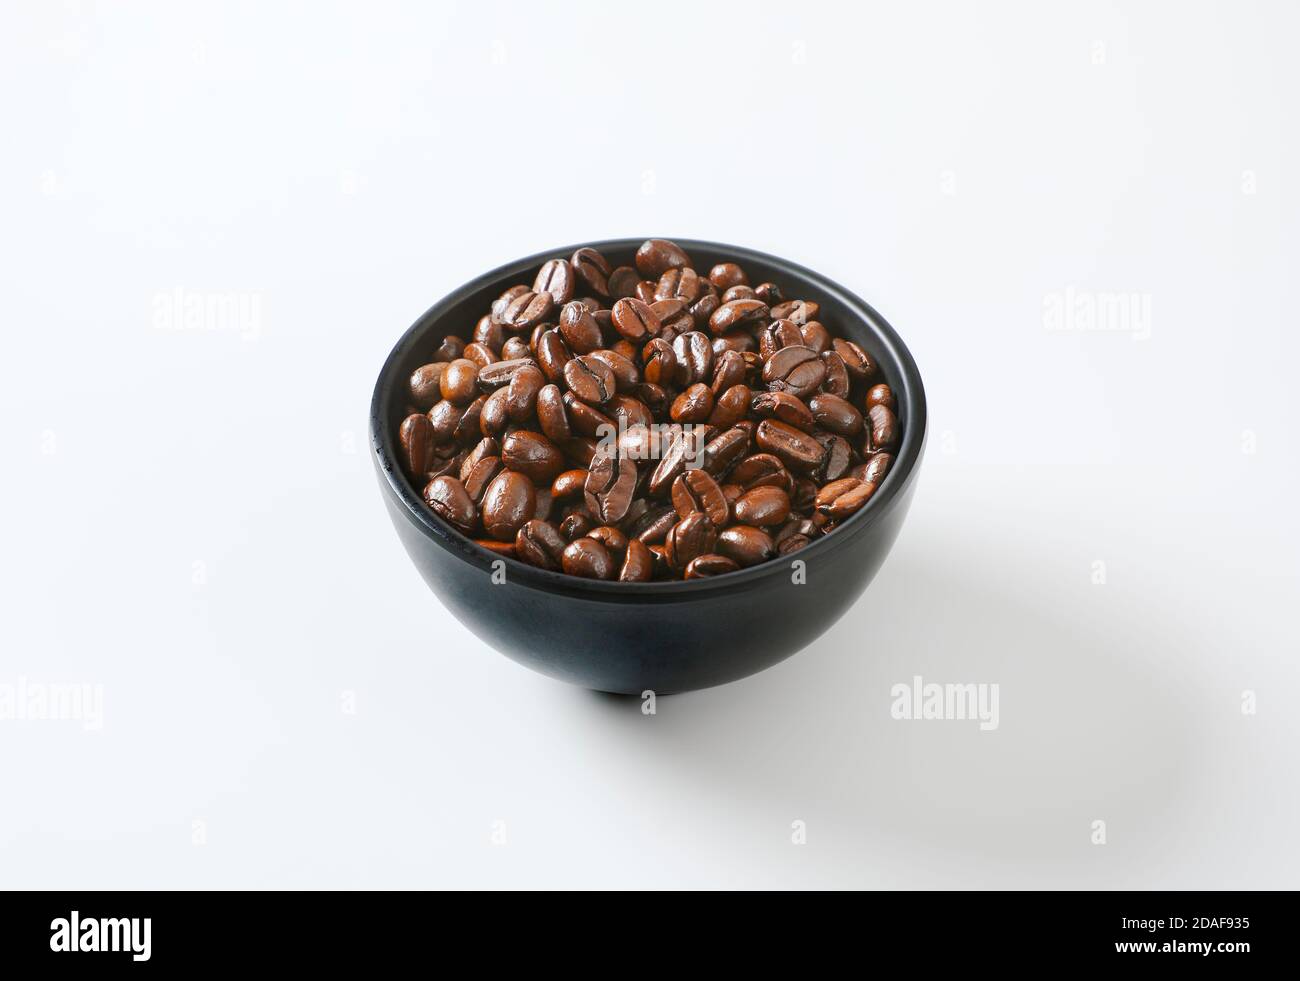 Roasted coffee beans in black bowl Stock Photo